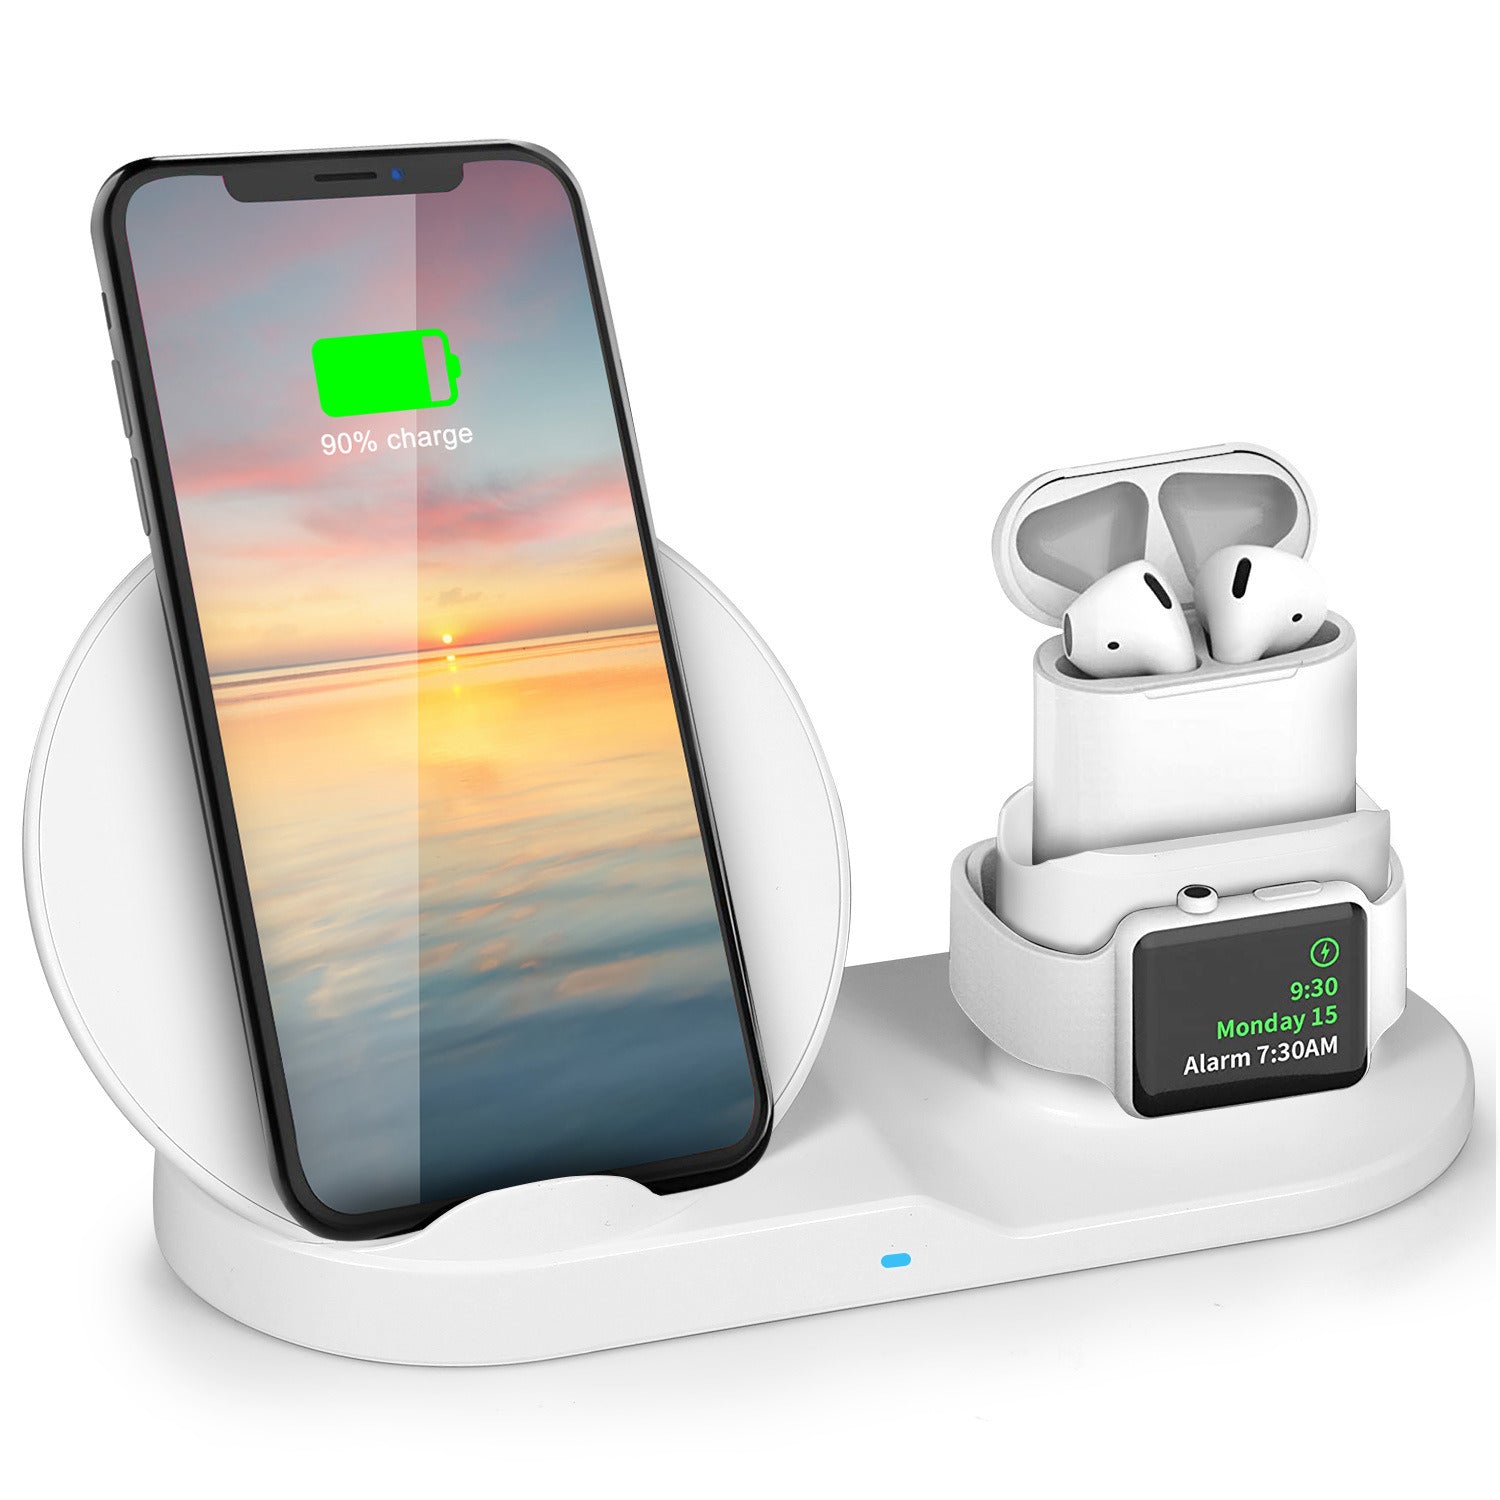 LazyPro Wireless Charger 10W Fast Charging Station For iPhone Apple iWatch Series 5/4/3/2/1 AirPods